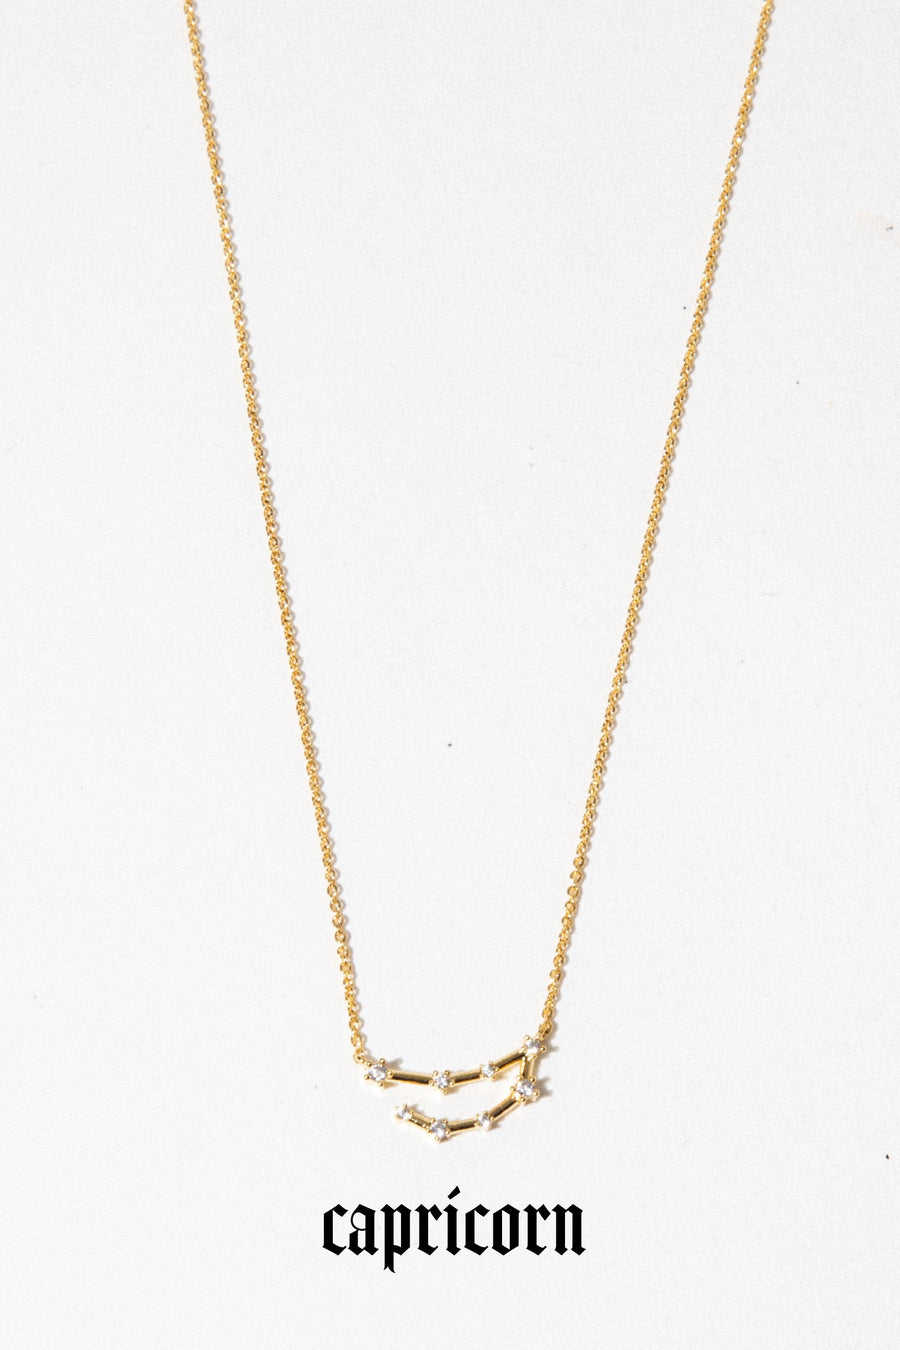 charis Jewelry Capricorn / 16 Inches / Gold Constellation Necklace